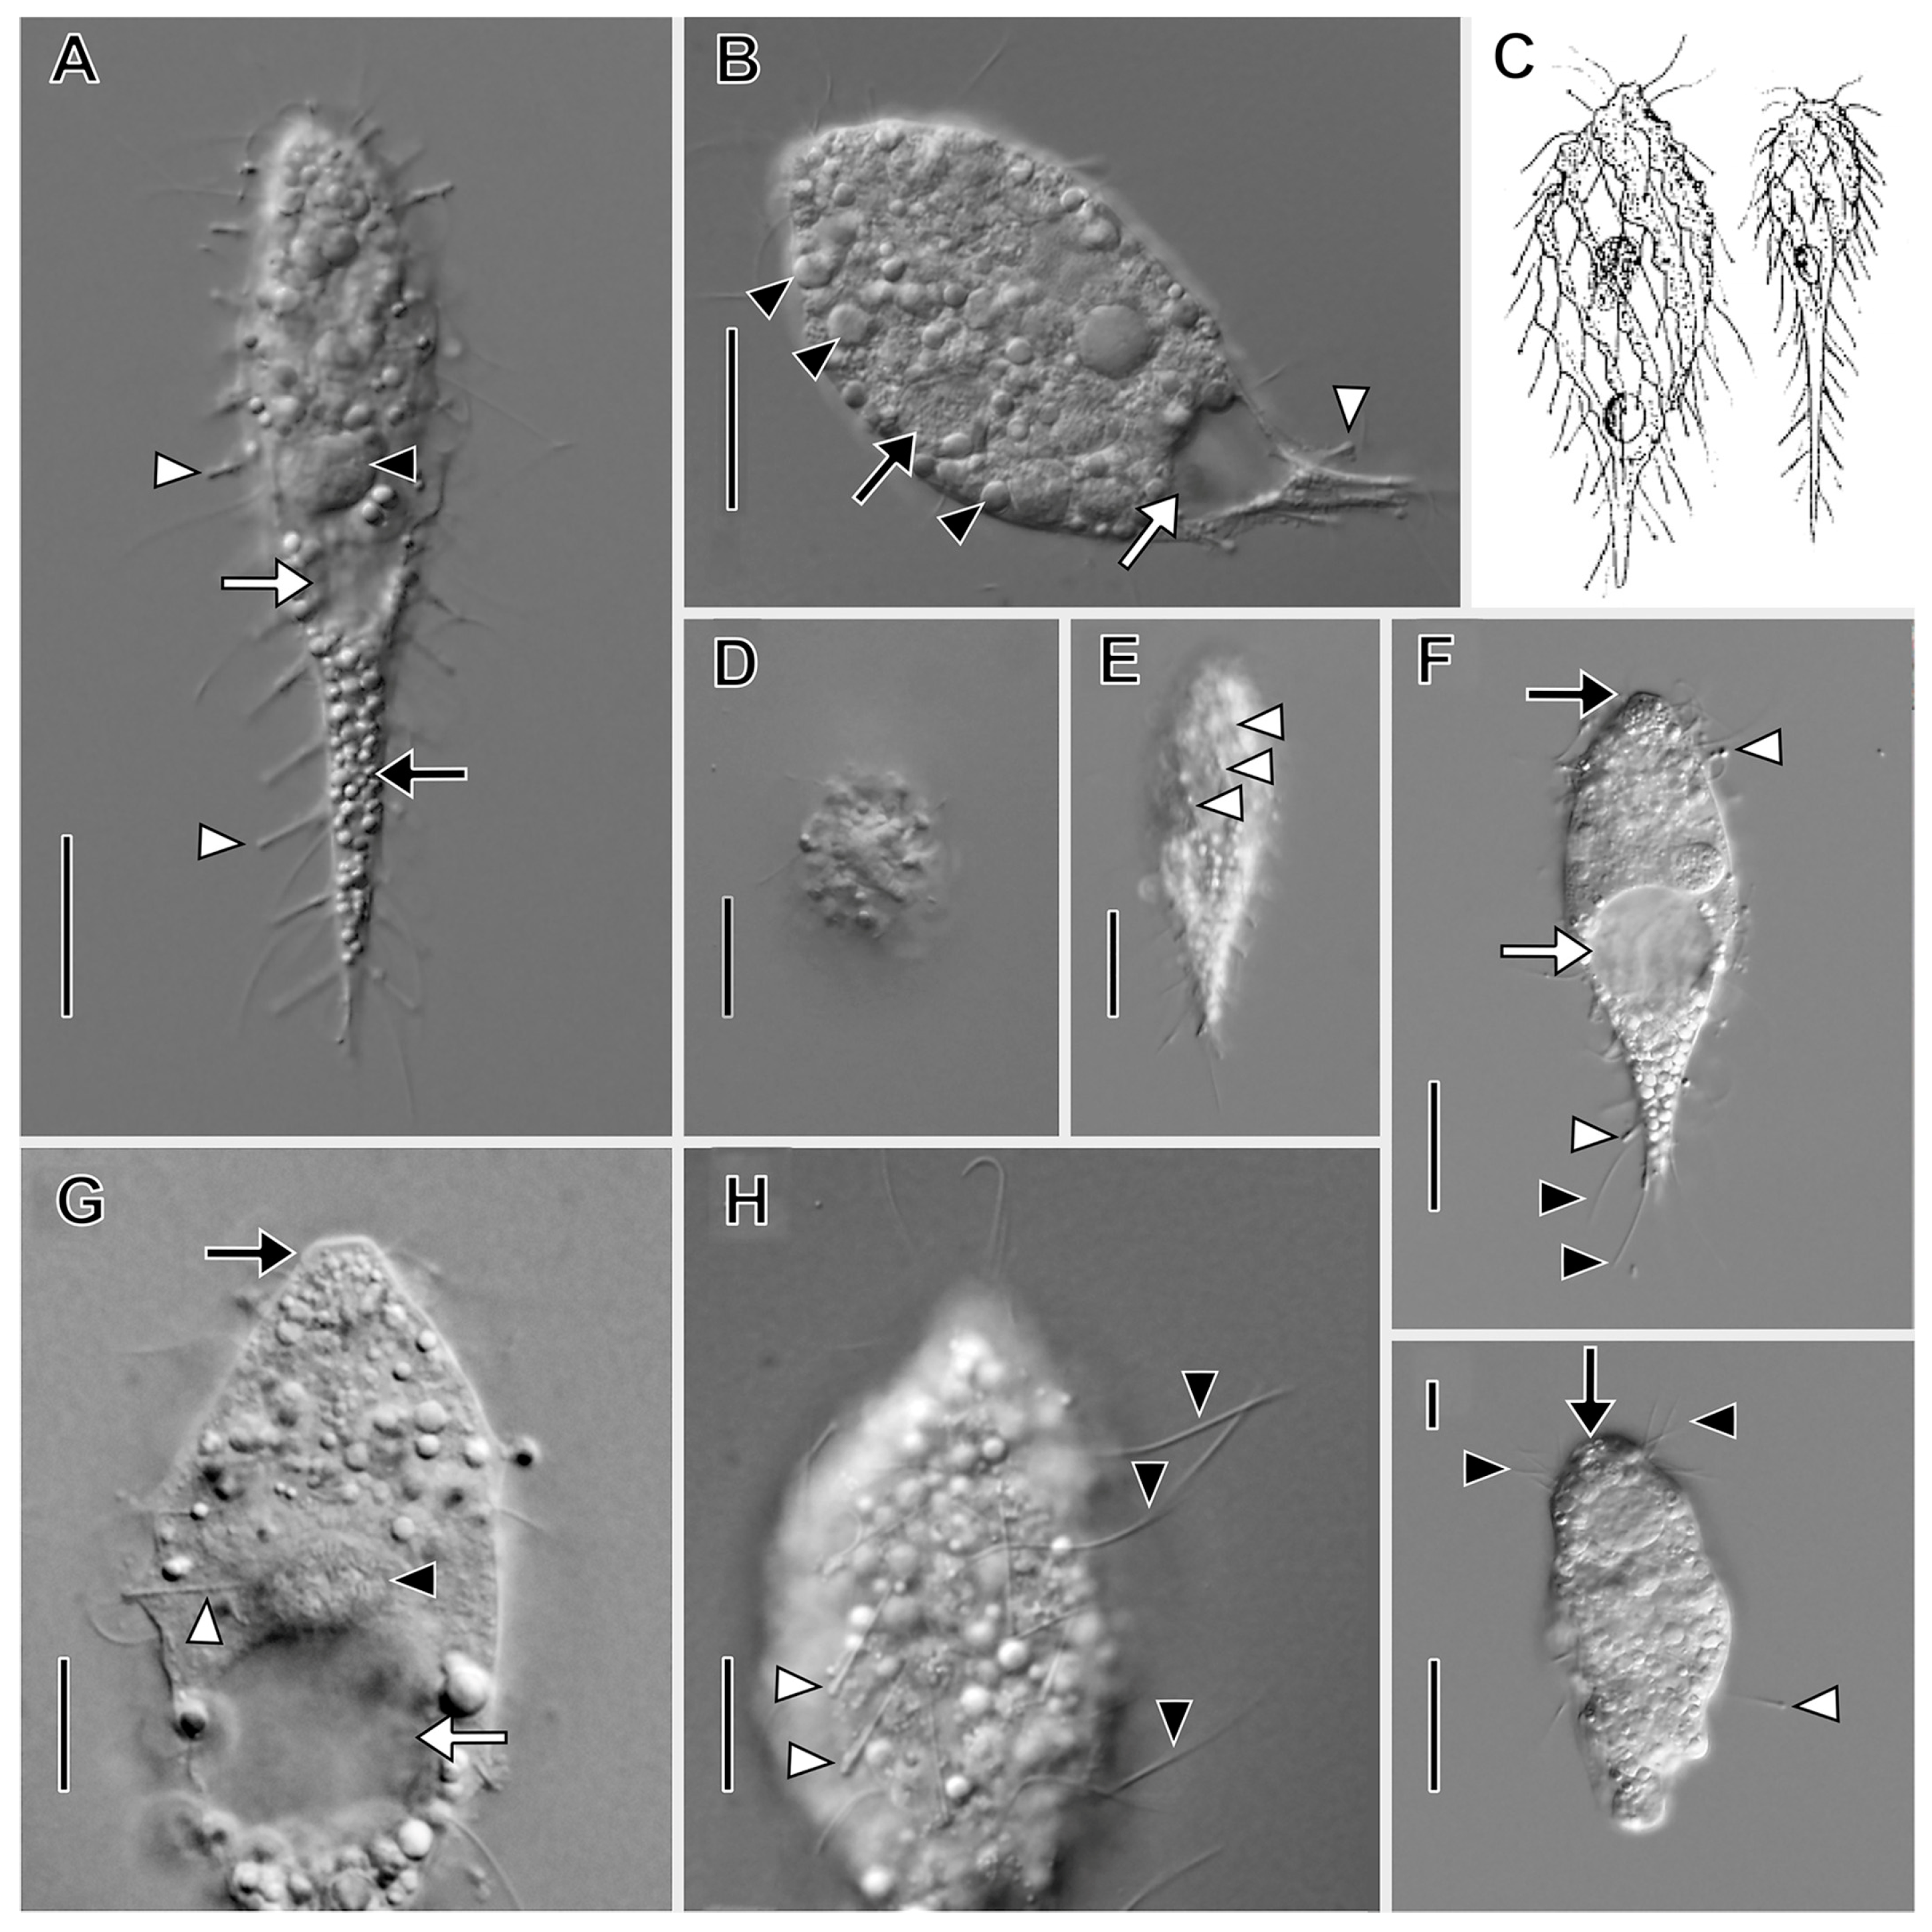 Biology Free Full-Text Rediscovery of Remarkably Rare Anaerobic Tentaculiferous Ciliate Genera Legendrea and Dactylochlamys (Ciliophora Litostomatea) pic